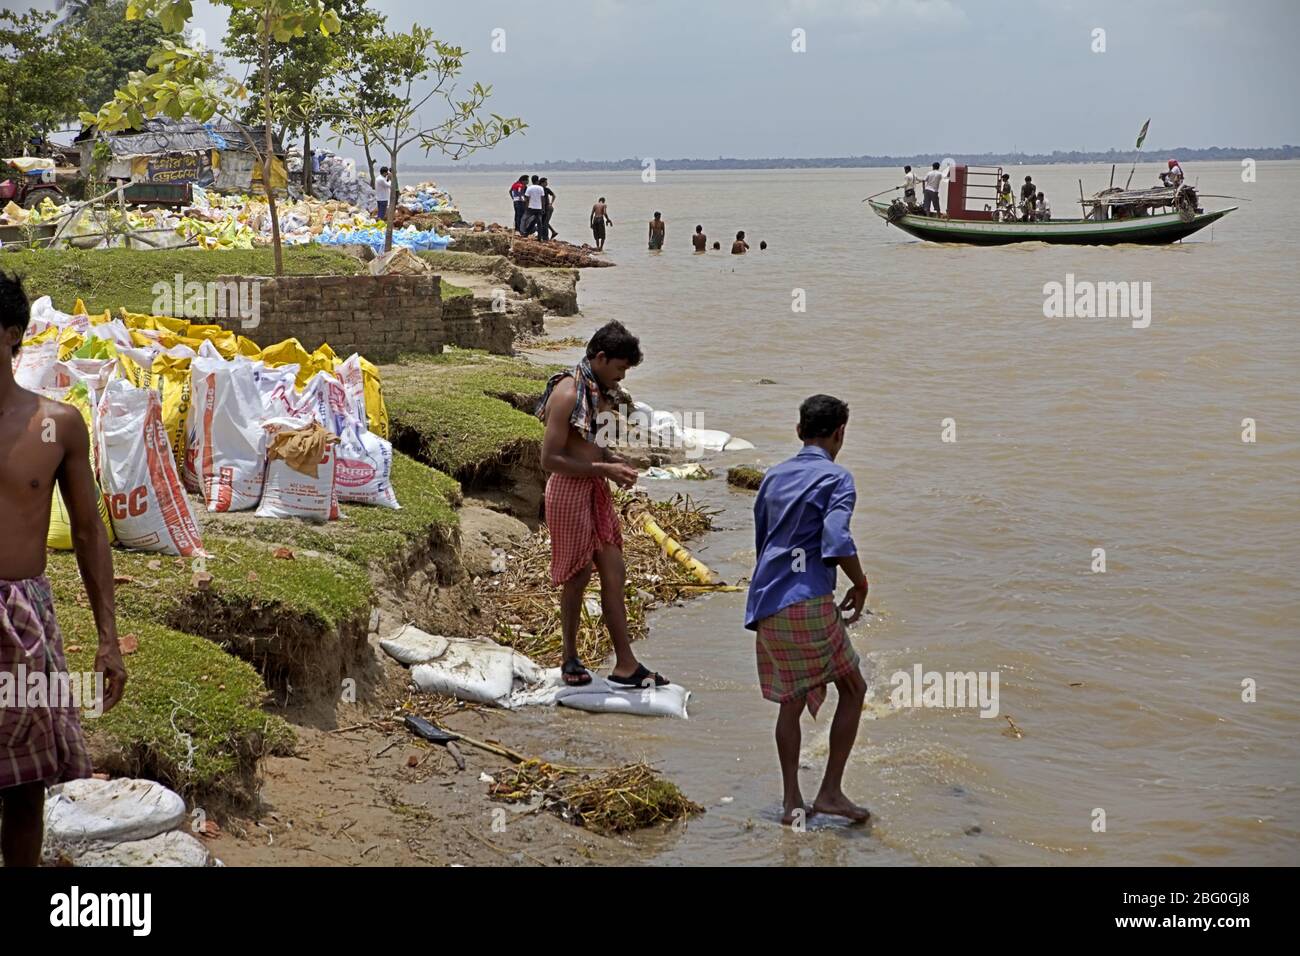 Workers cleaning themselves on the bank of Rupnarayan river before lunch time during a river erosion control project, as a river crossing boat carrying passengers is arriving in the background in Tamluk, Purba Medinipur, West Bengal, India. Stock Photo